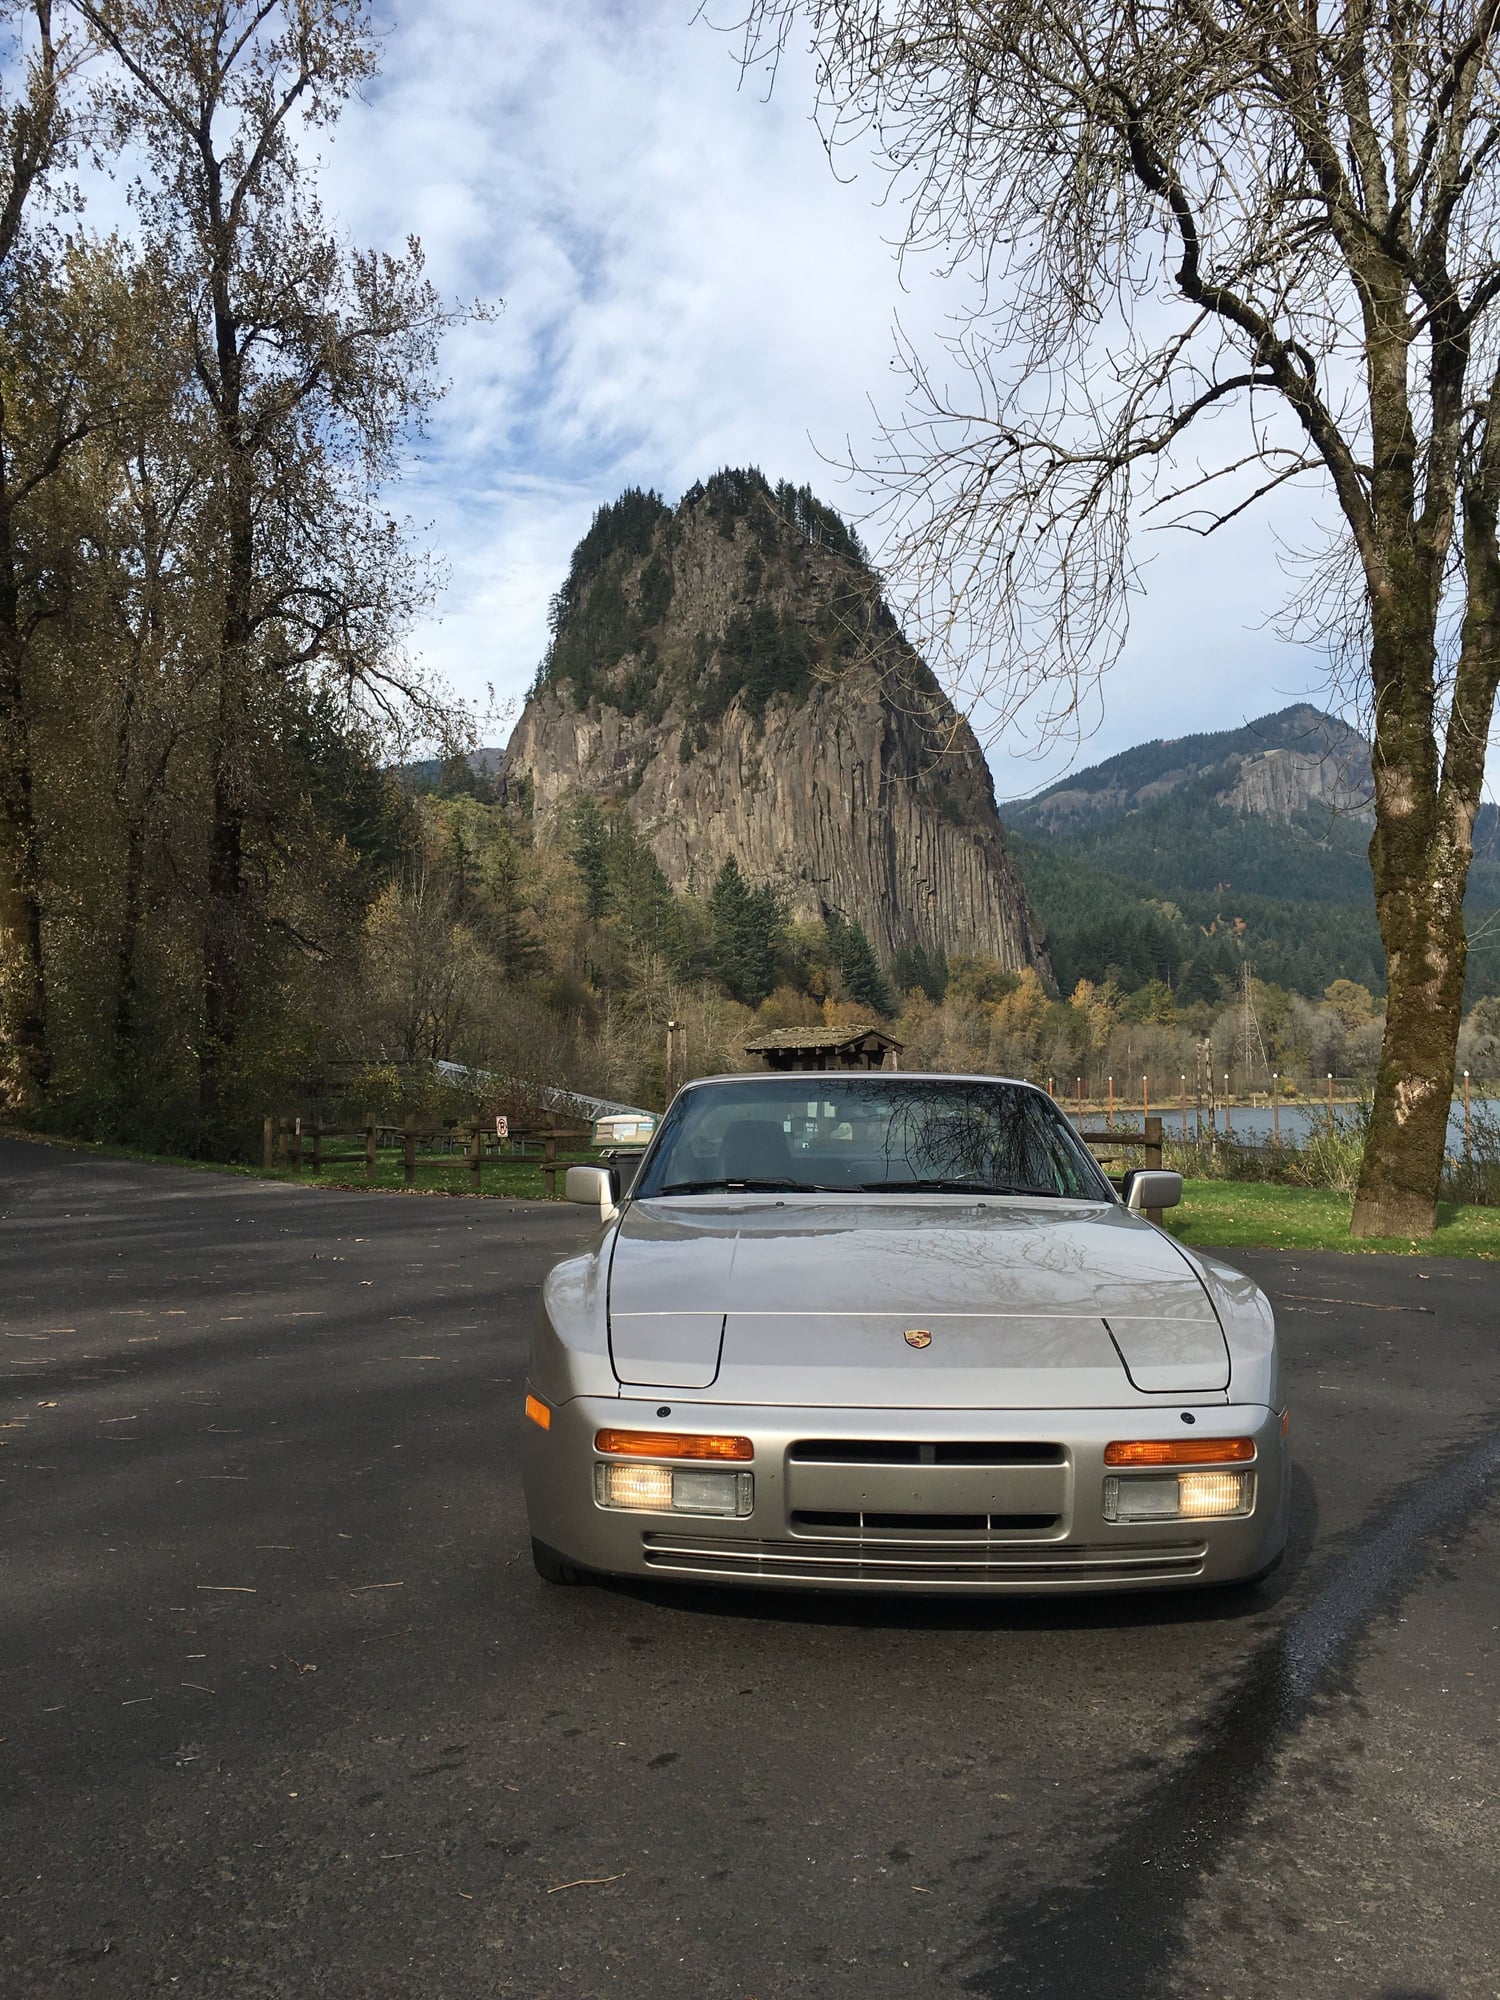 1988 Porsche 944 - All Original 1988 944 Turbo S with low mileage. - Used - VIN WP0AA2958JN151636 - 43,300 Miles - 4 cyl - 2WD - Manual - Coupe - Silver - Camas, WA 98671, United States